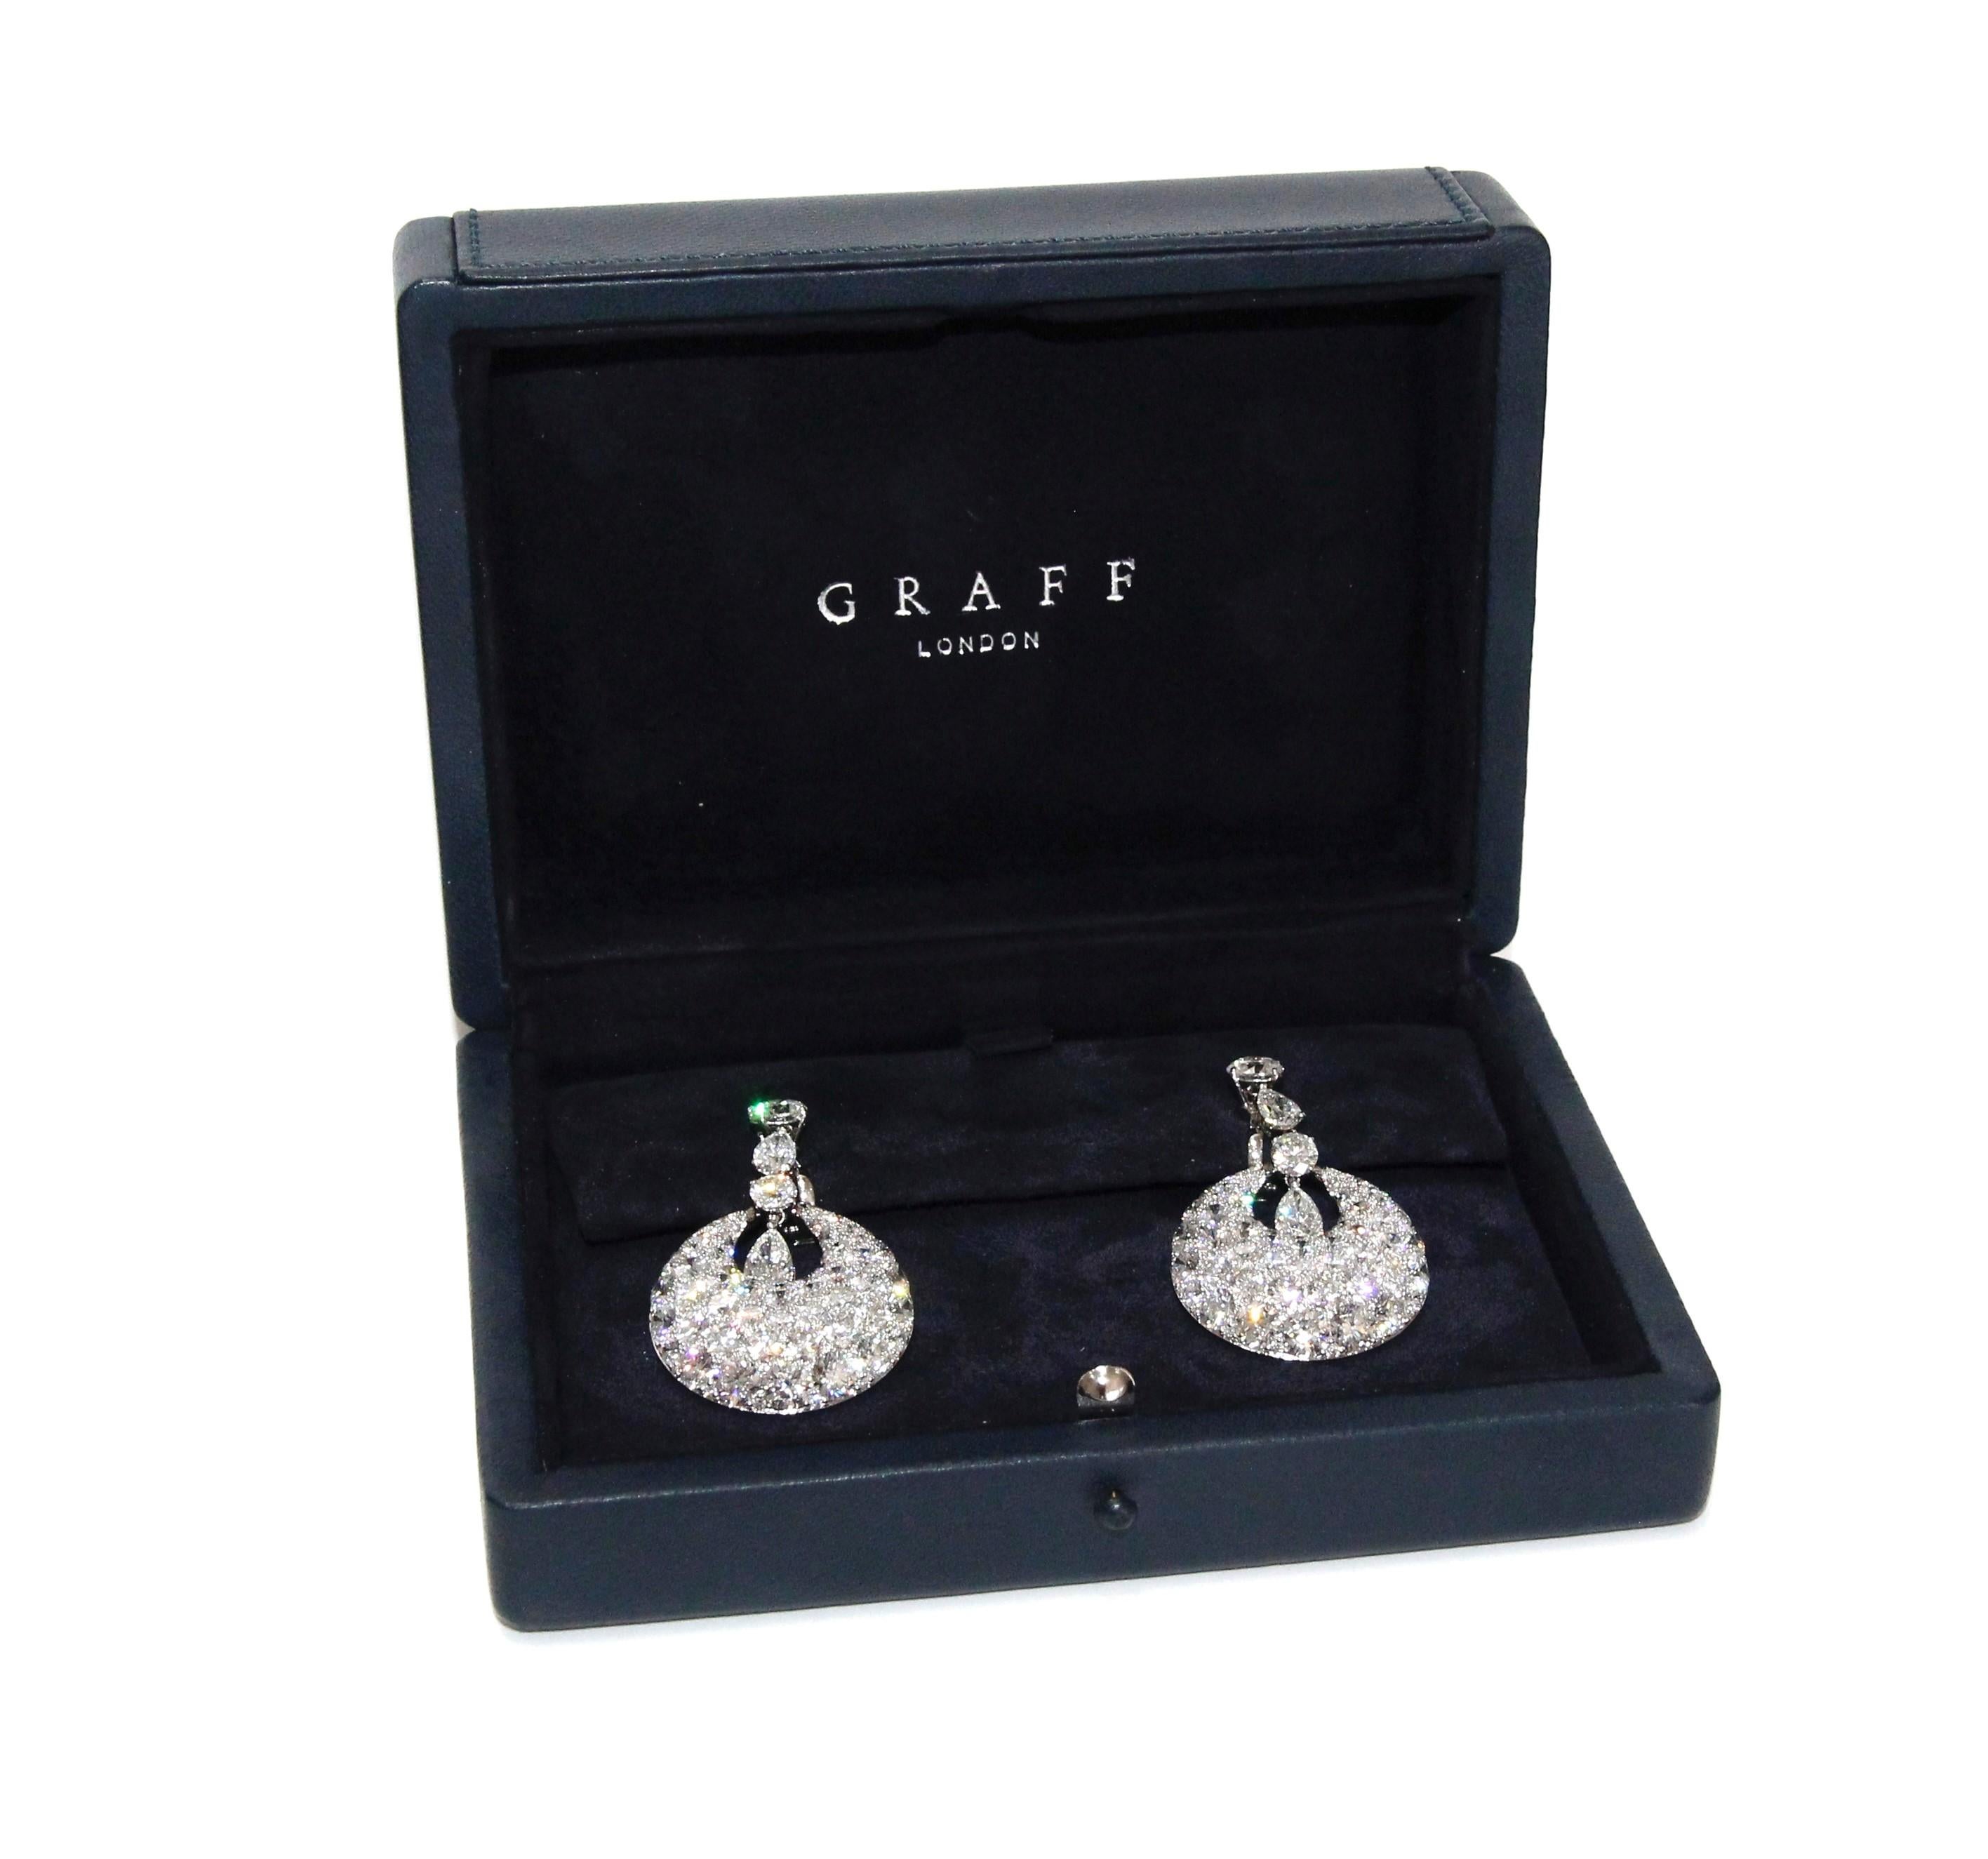 
These earrings are beautifully crafted  from 18K White Gold 
206 White Round Diamonds 20.01 
1 White Round Diamond 1.51ct GIA certified F VS2
1 White Round Diamond 1.50ct GIA certified F VS1
4 Fancy Shape White Diamonds 3.59ct
Total Diamond weight